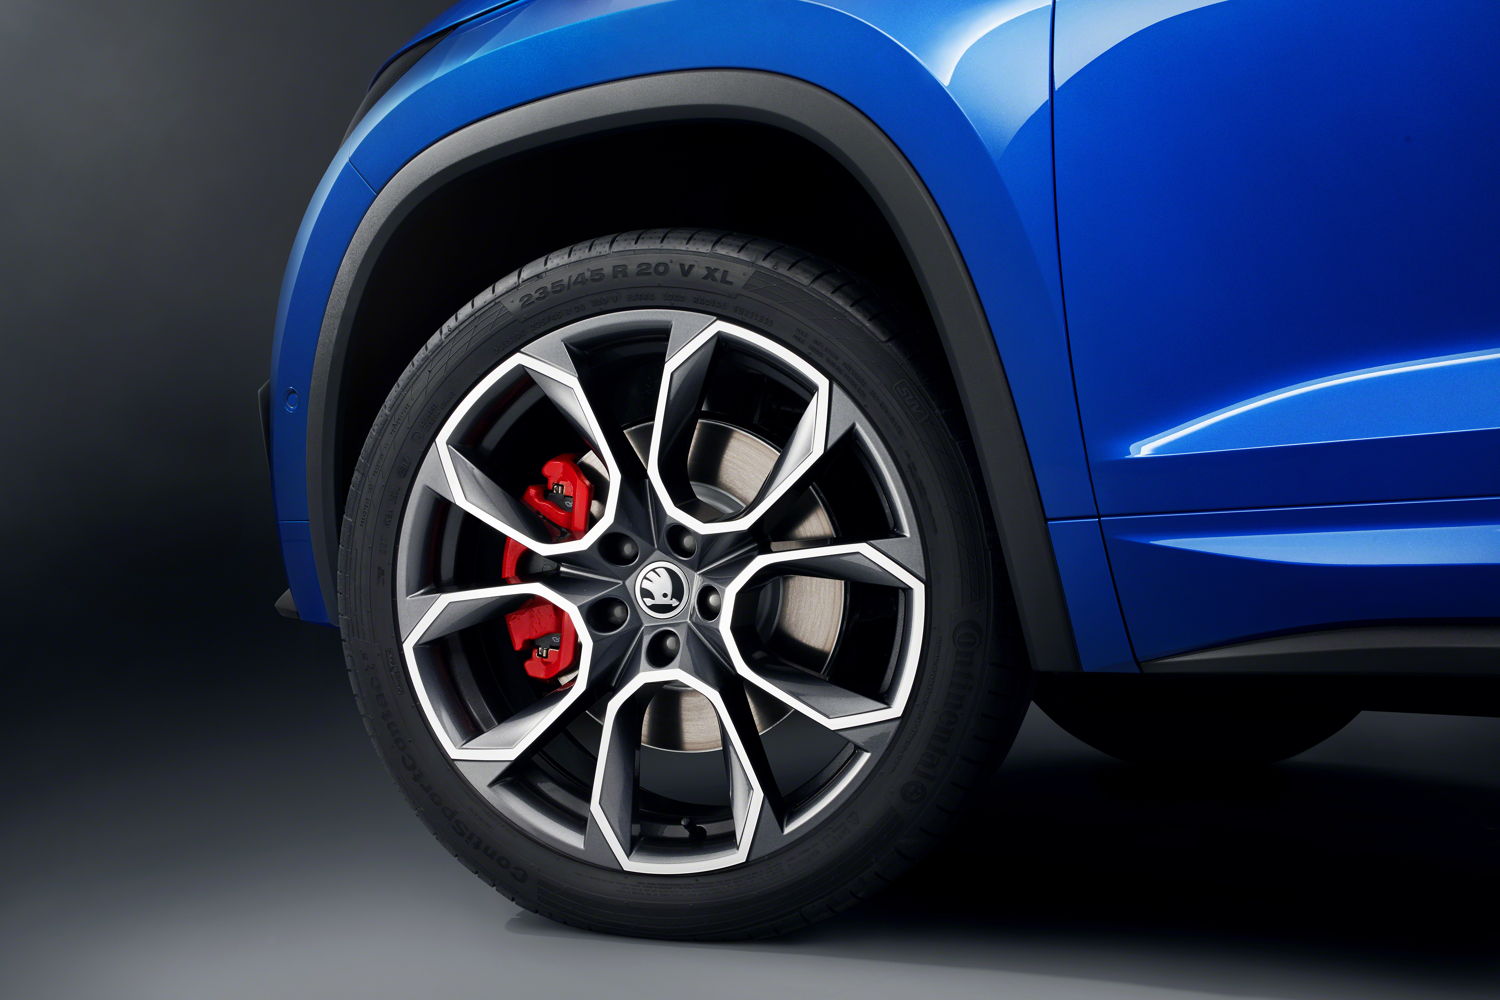 The KODIAQ RS's 20-inch Xtreme alloy wheels and red brake callipers demonstrate its sporty potential.